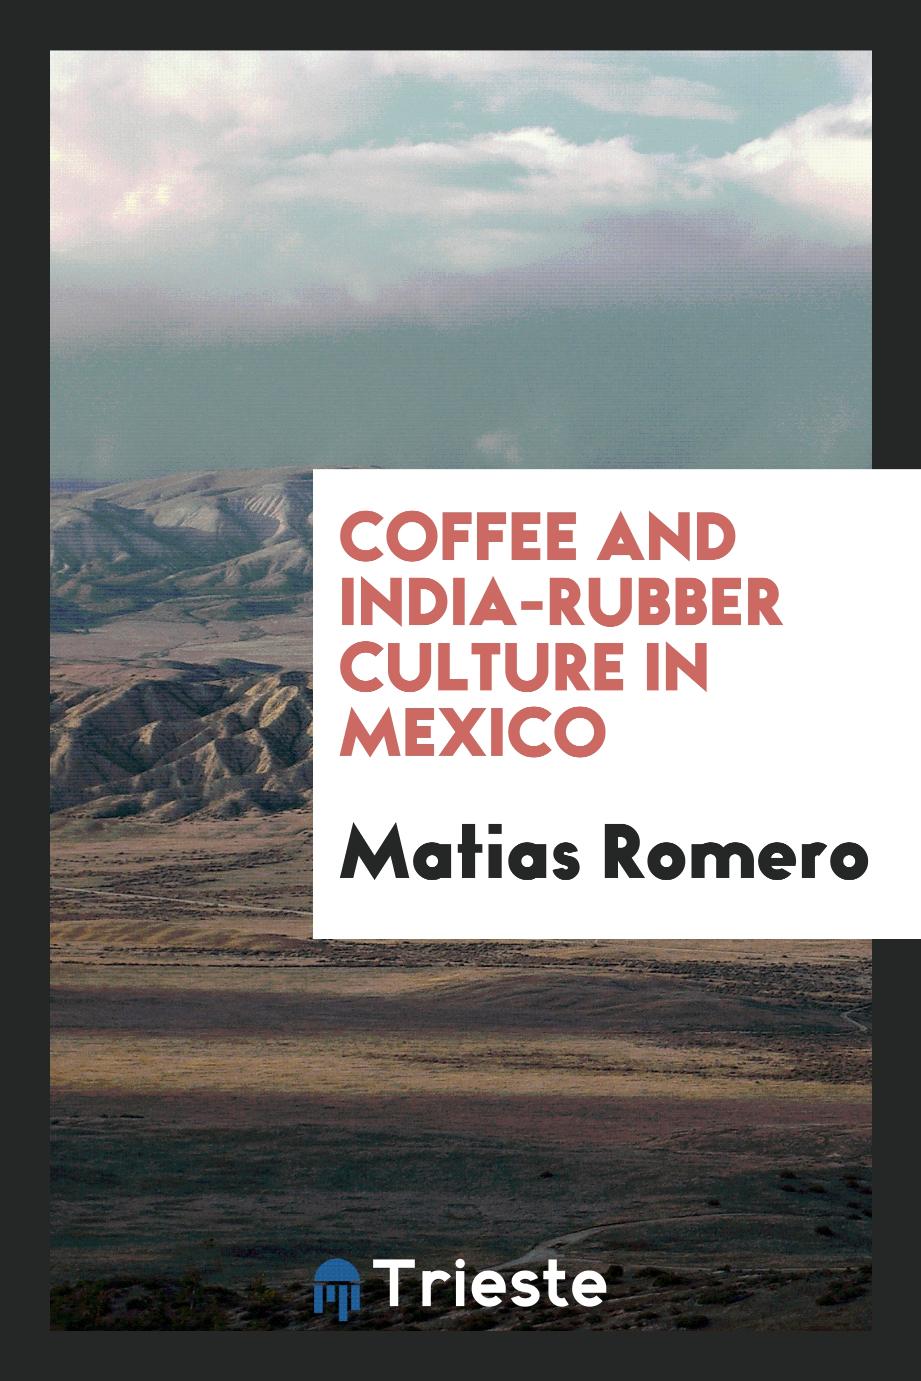 Coffee and india-rubber culture in Mexico